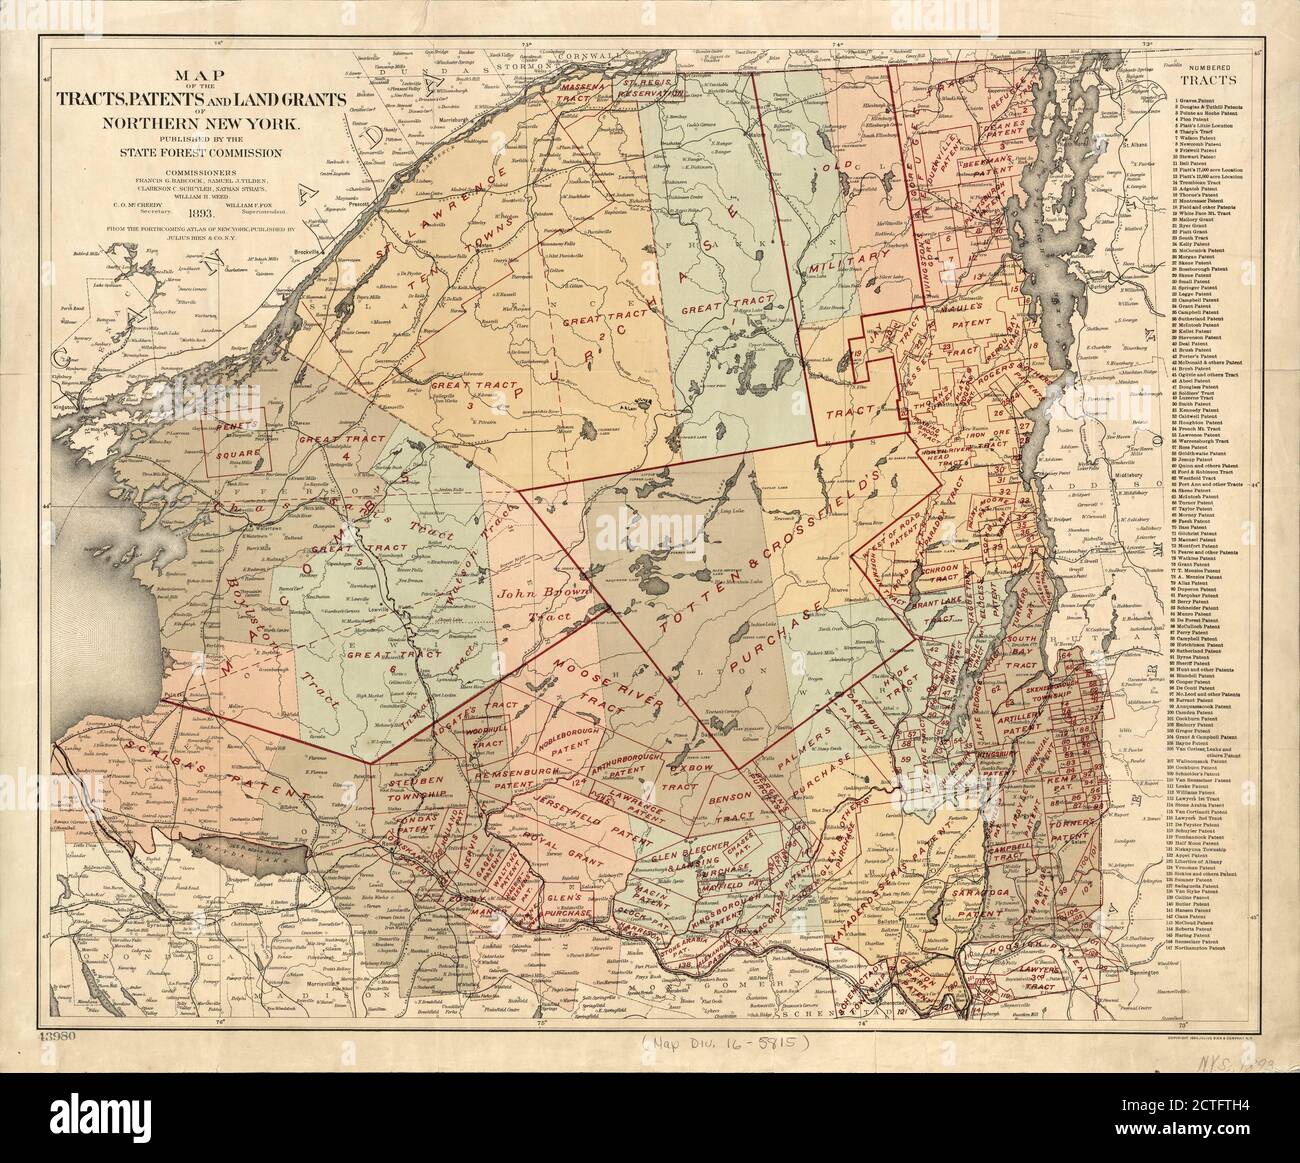 Map of the tracts, patents and land grants of northern New York, cartographic, Maps, 1894, Julius Bien & Co Stock Photo